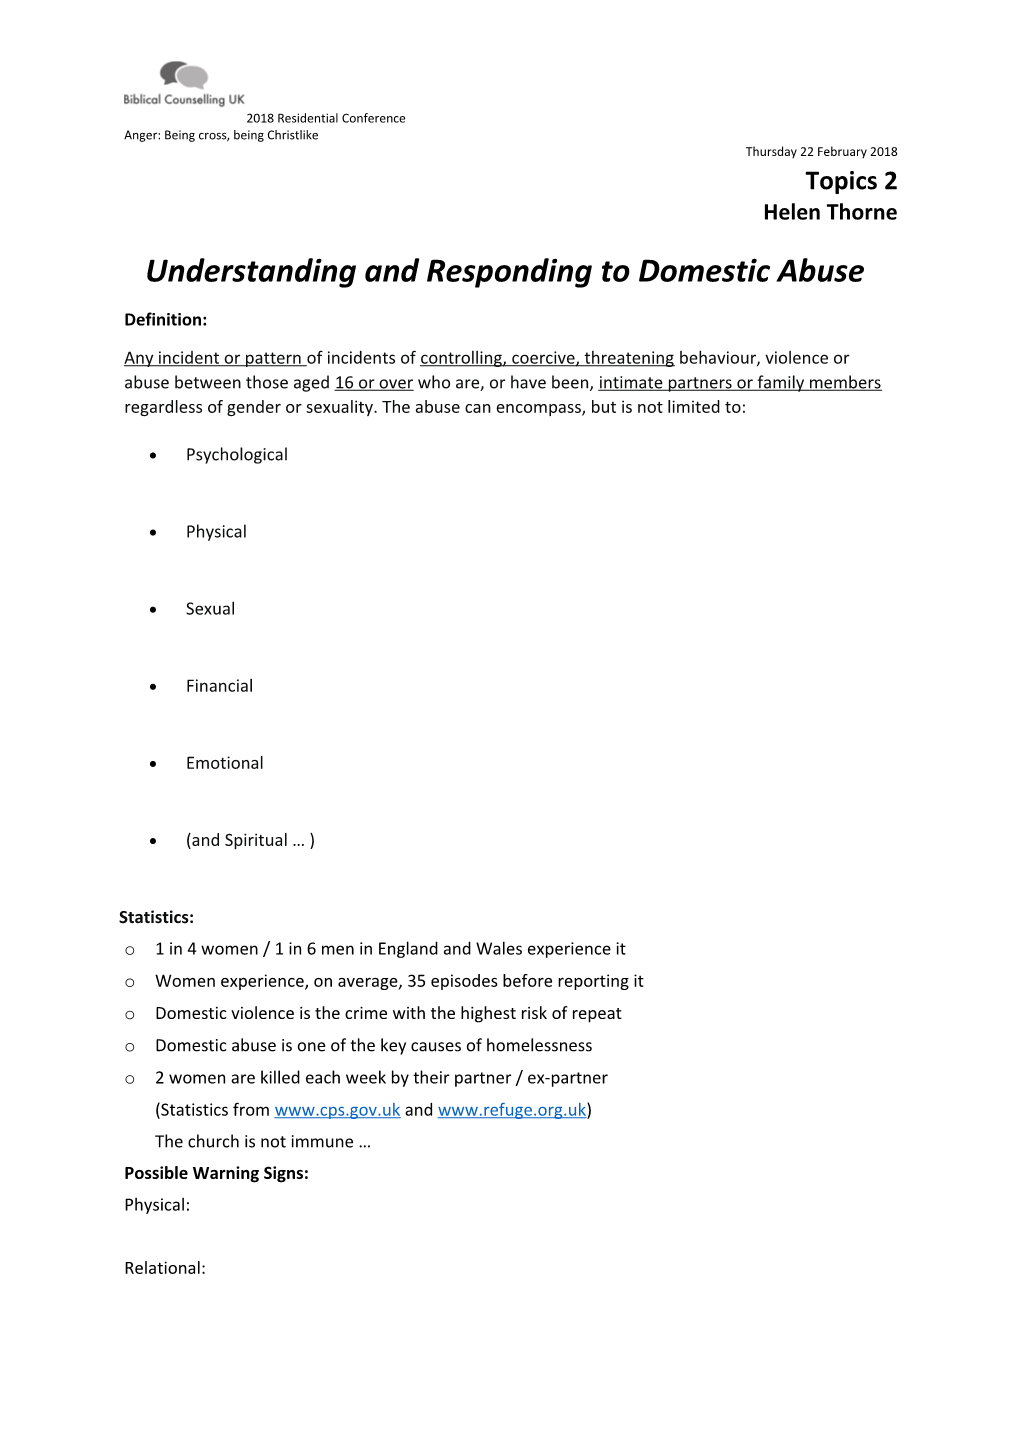 Understanding and Responding to Domestic Abuse